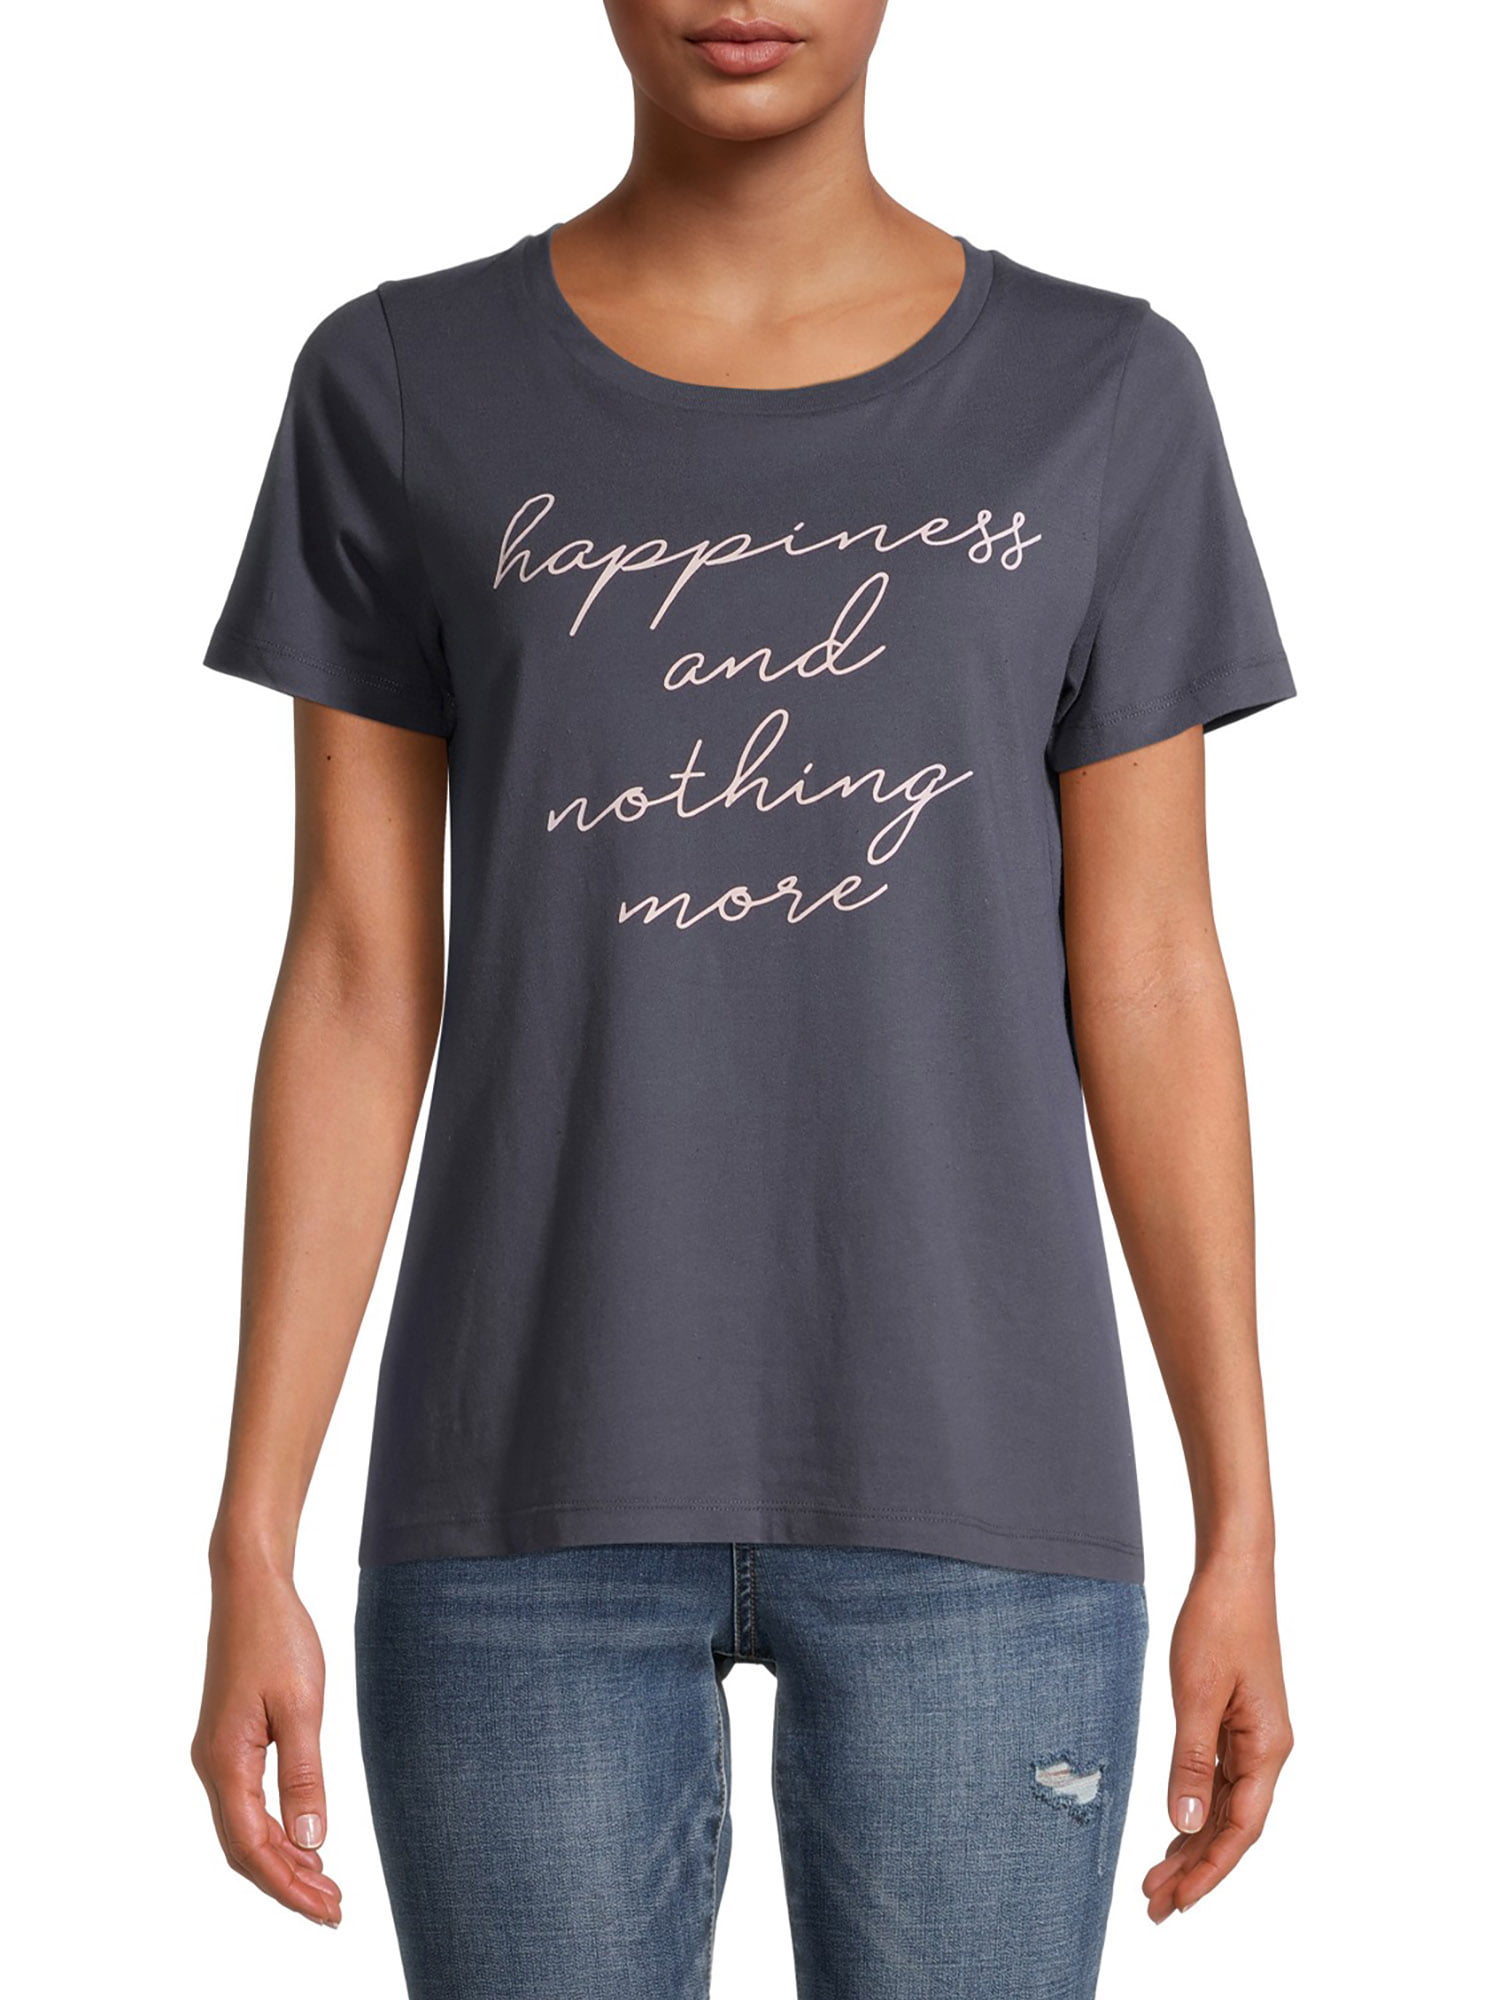 Gray by Grayson Social Women's Happiness and Nothing More Short Sleeve ...